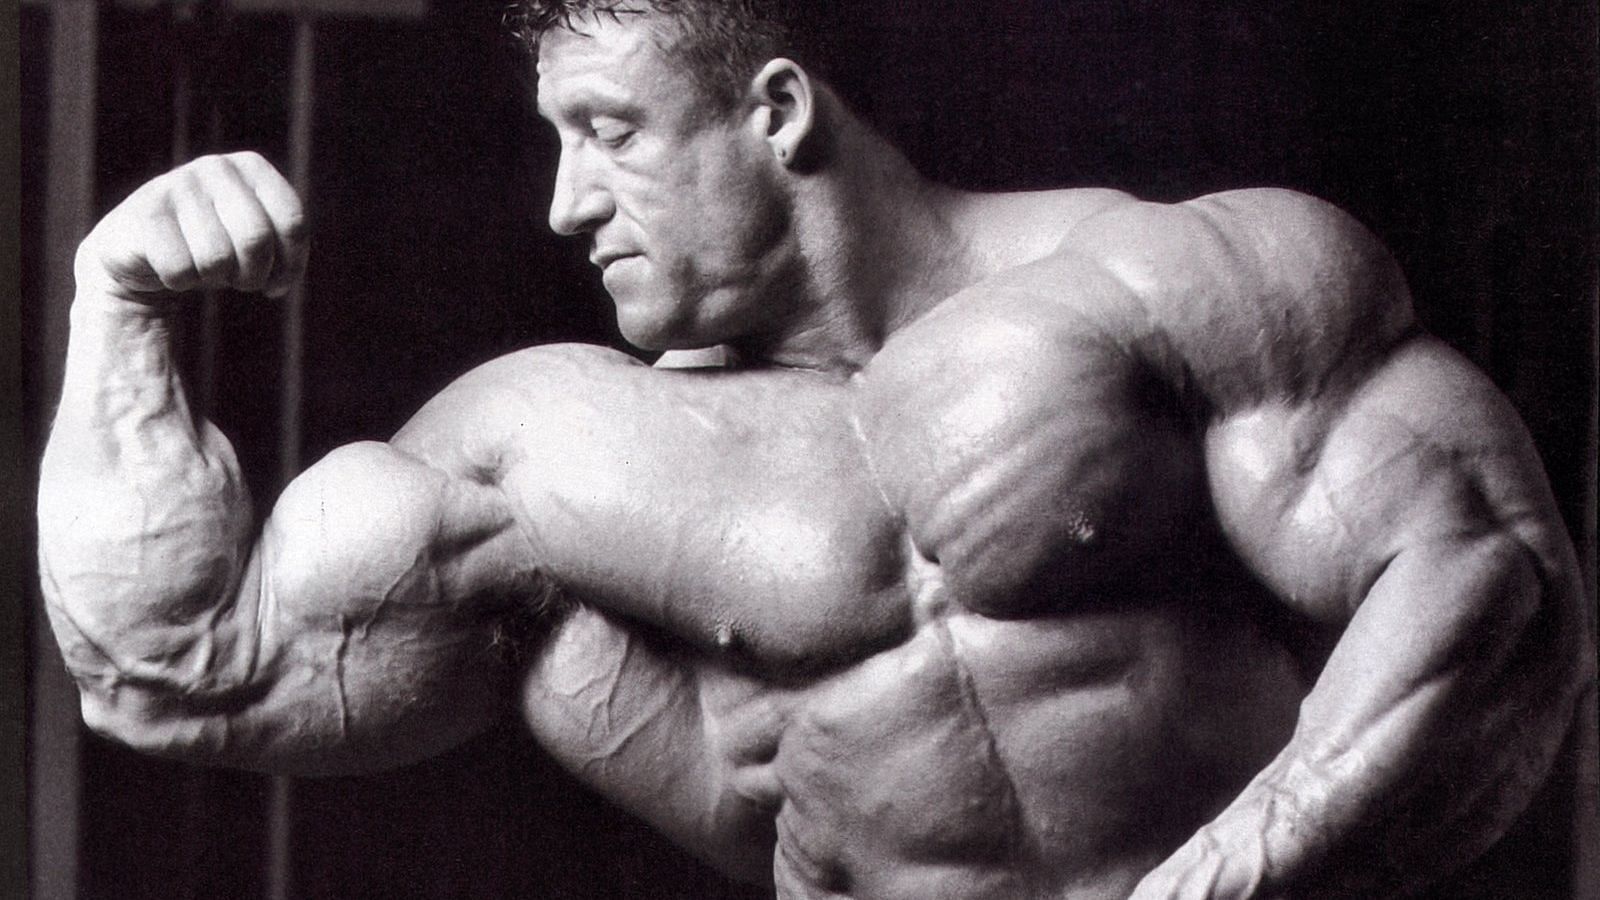 Yates won the Mr. Olympia title, the most prestigious bodybuilding competition in the world, six times consecutively (Photo via wallpapersafari.com)